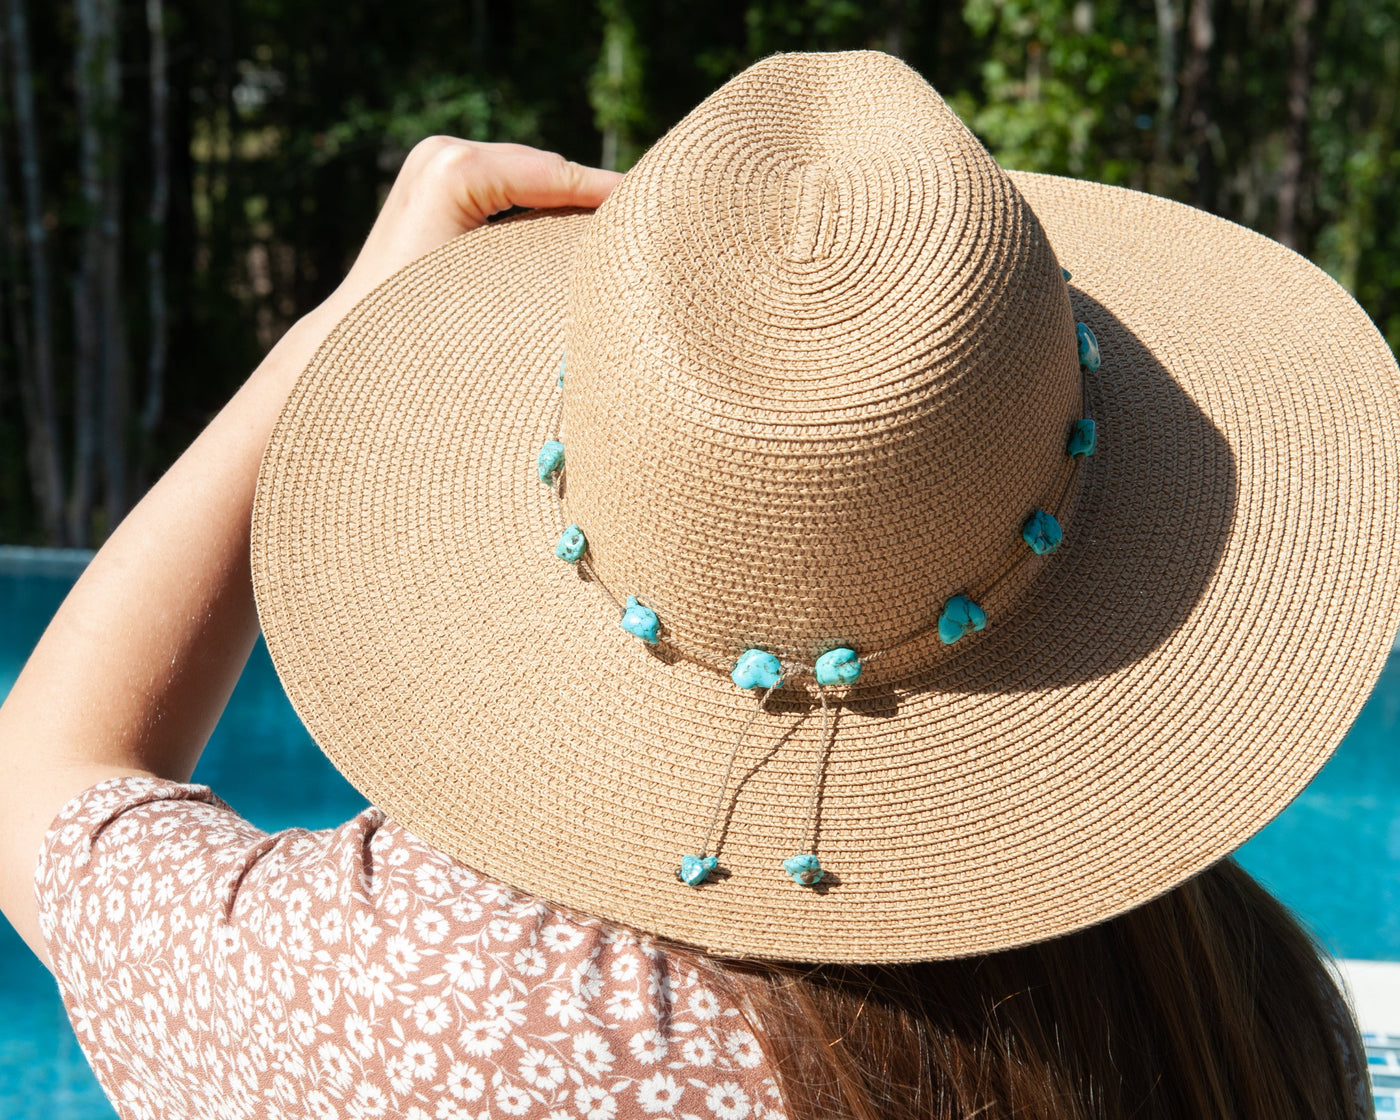 Stone Duets - necklace + hatband